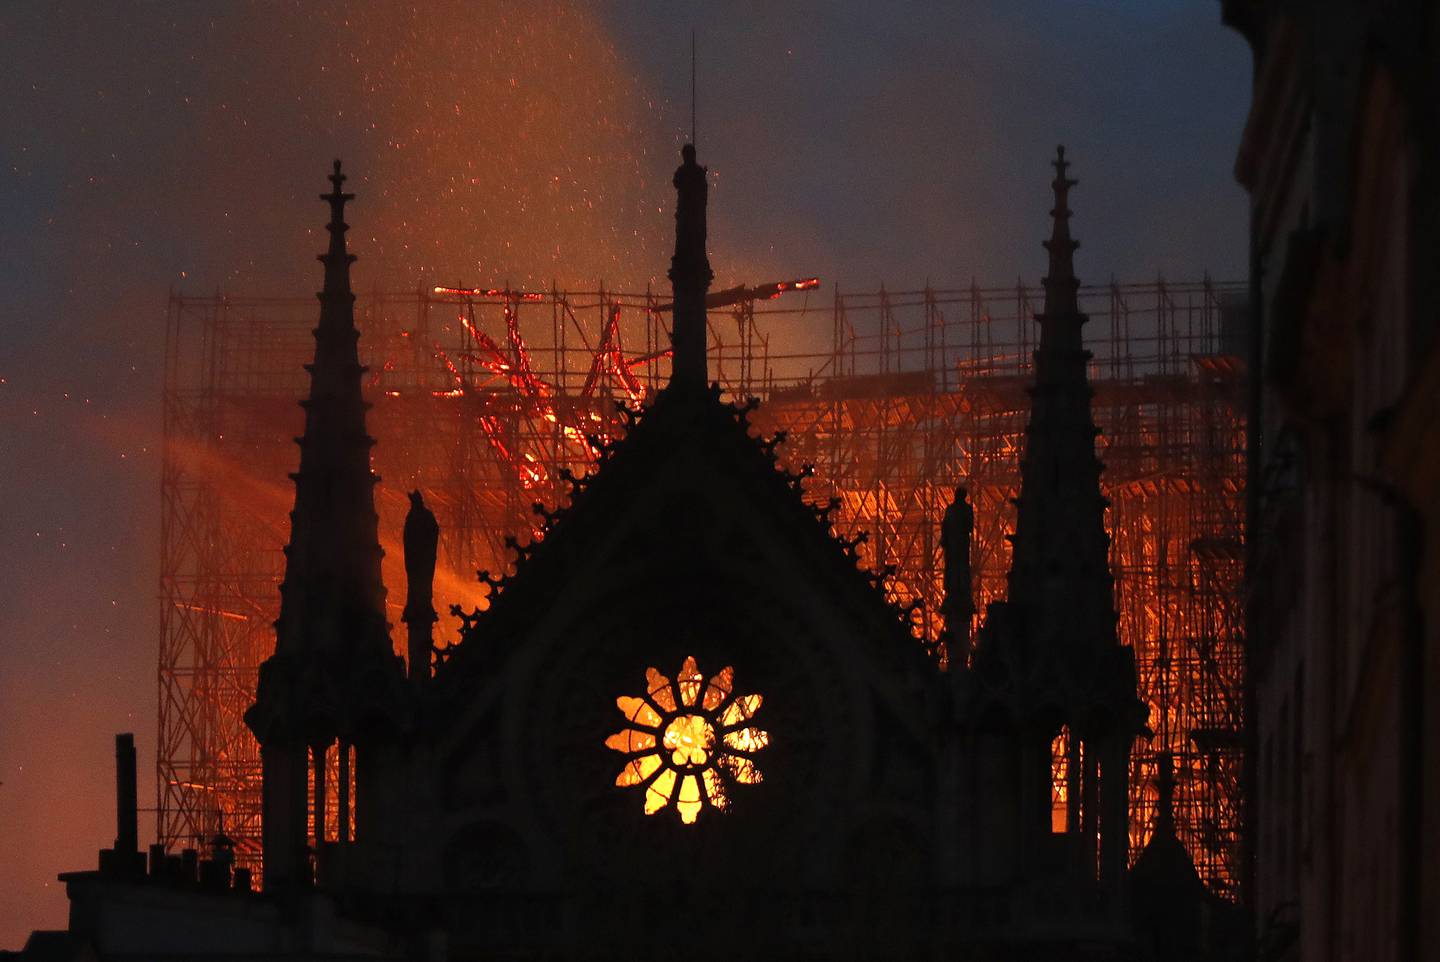 FILE - In this April 15, 2019, file photo, flames and smoke rise from Notre Dame Cathedral as it burns in Paris. The cathedral stands crippled, locked in a dangerous web of twisted metal scaffolding one year after a cataclysmic fire gutted its interior, toppled its famous spire and horrified the world. (AP Photo/Thibault Camus, File)